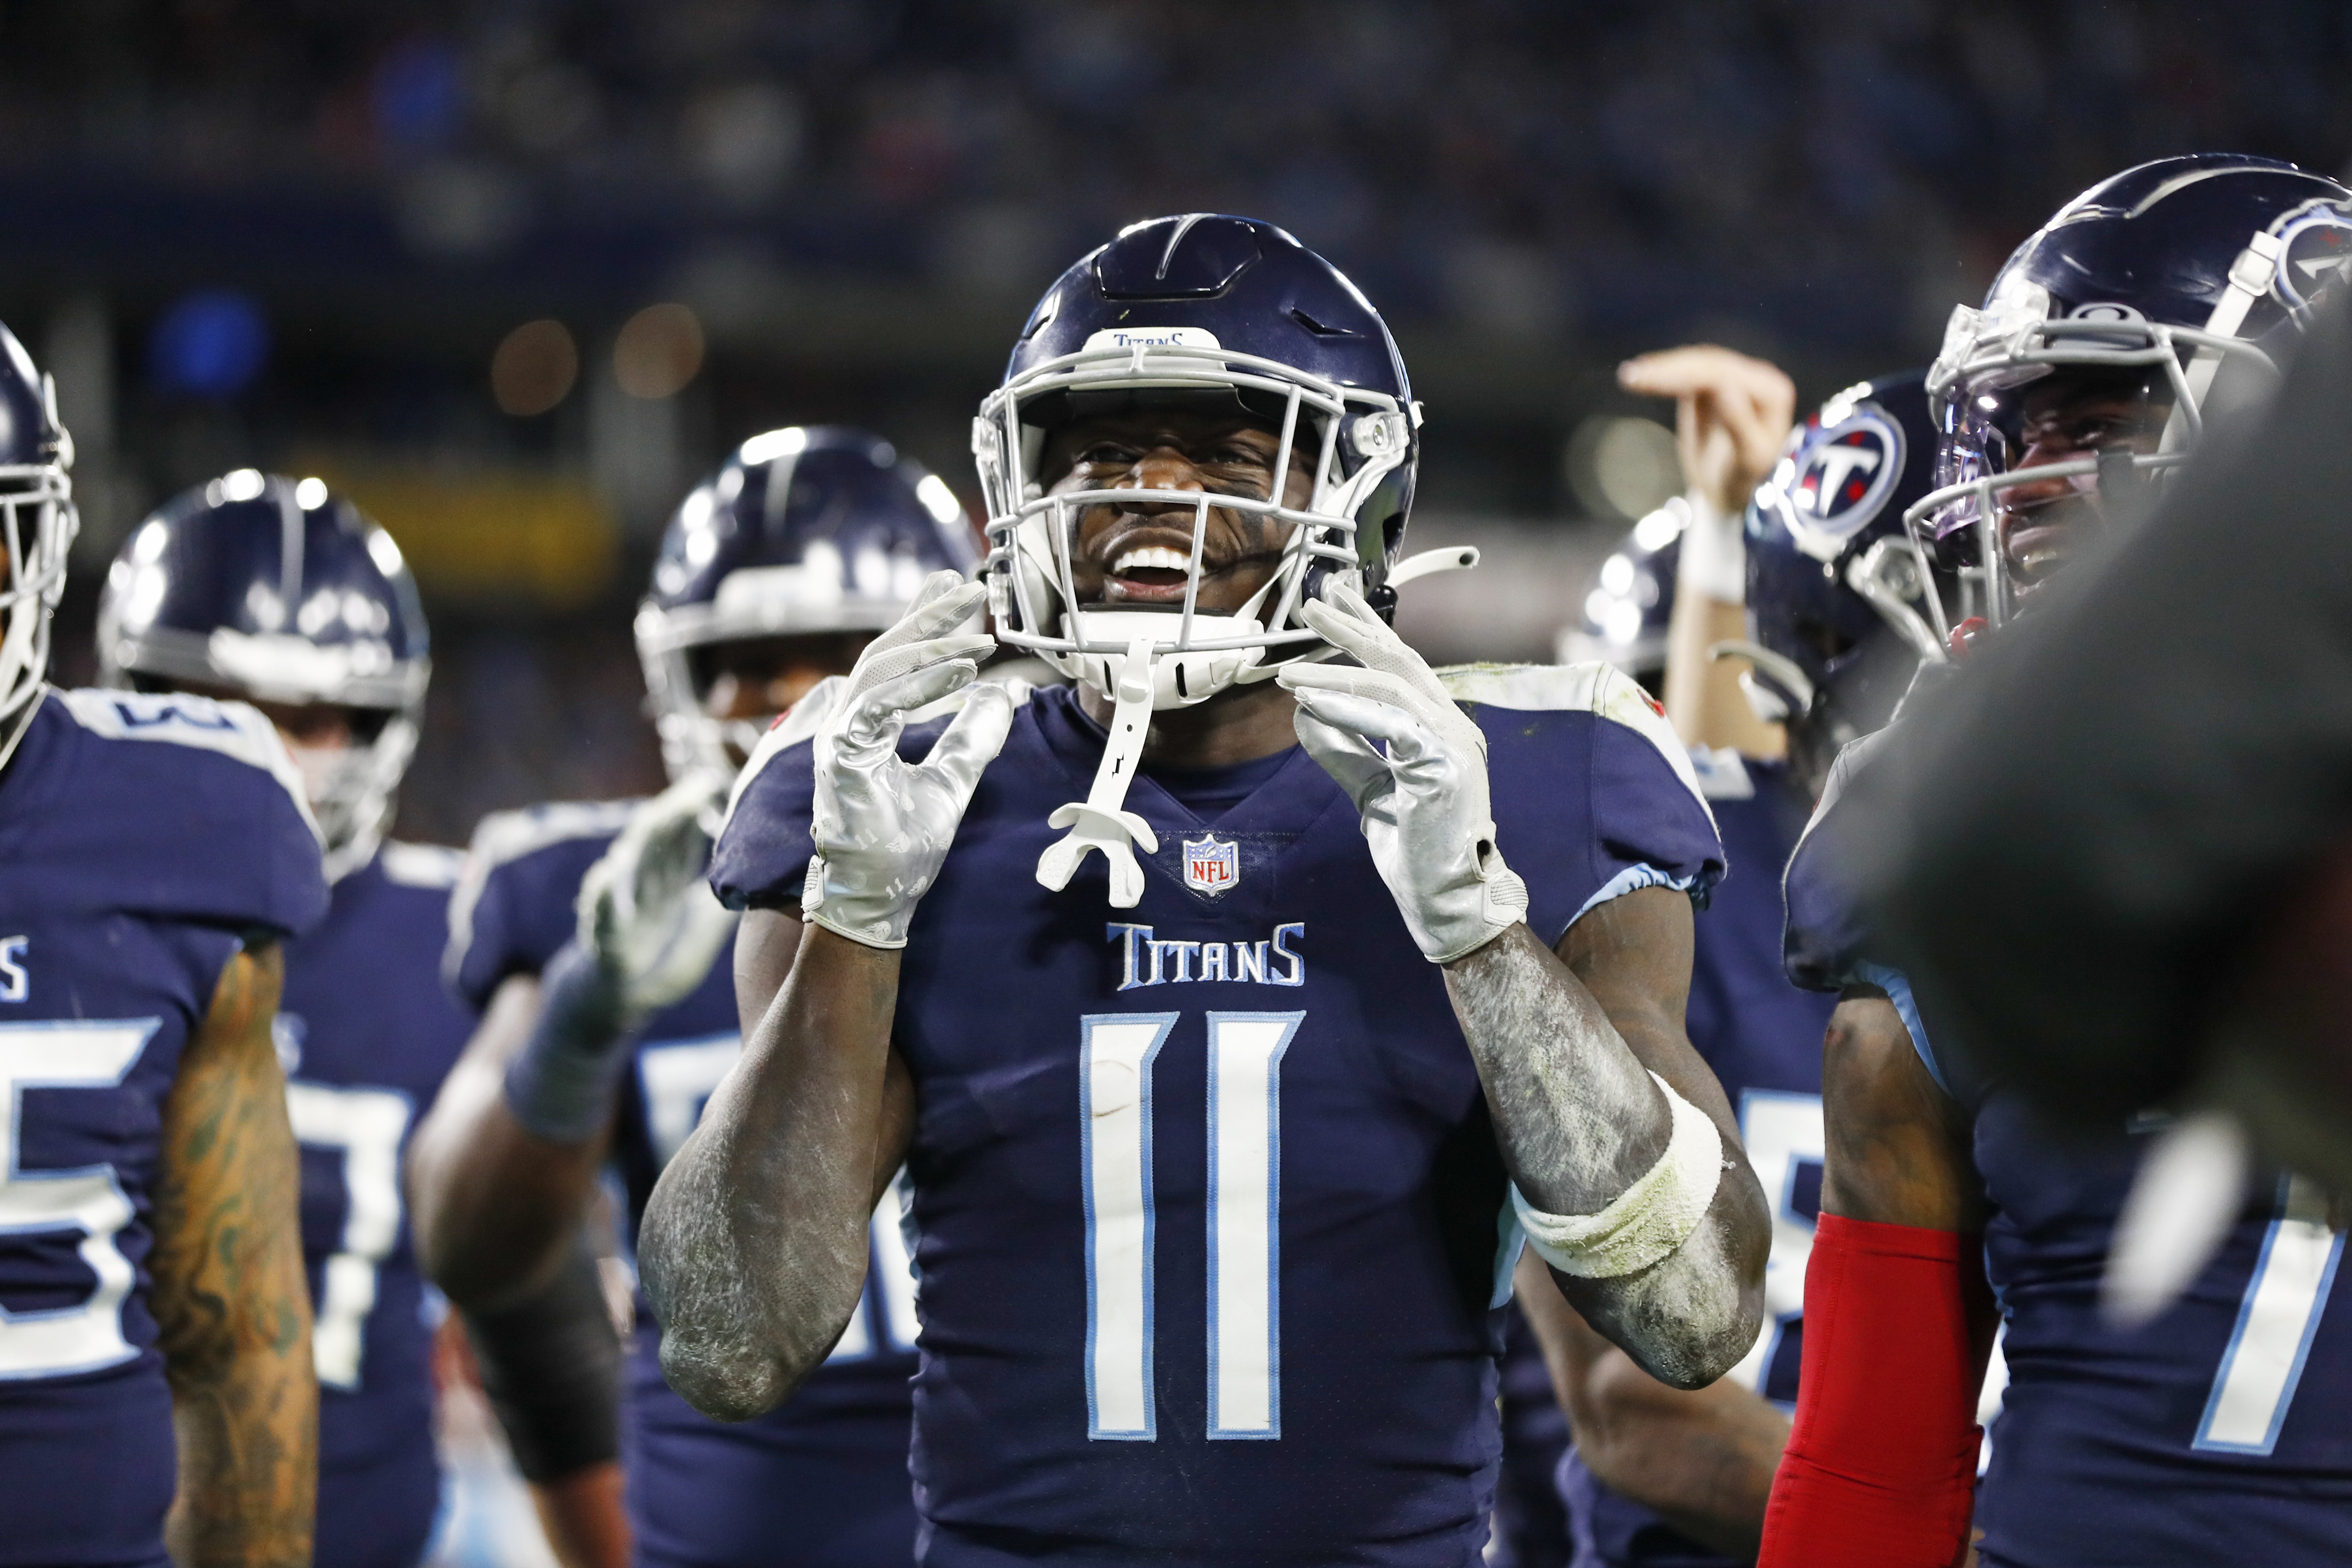 2022 NFL Draft: Titans trade A.J. Brown to Eagles for picks